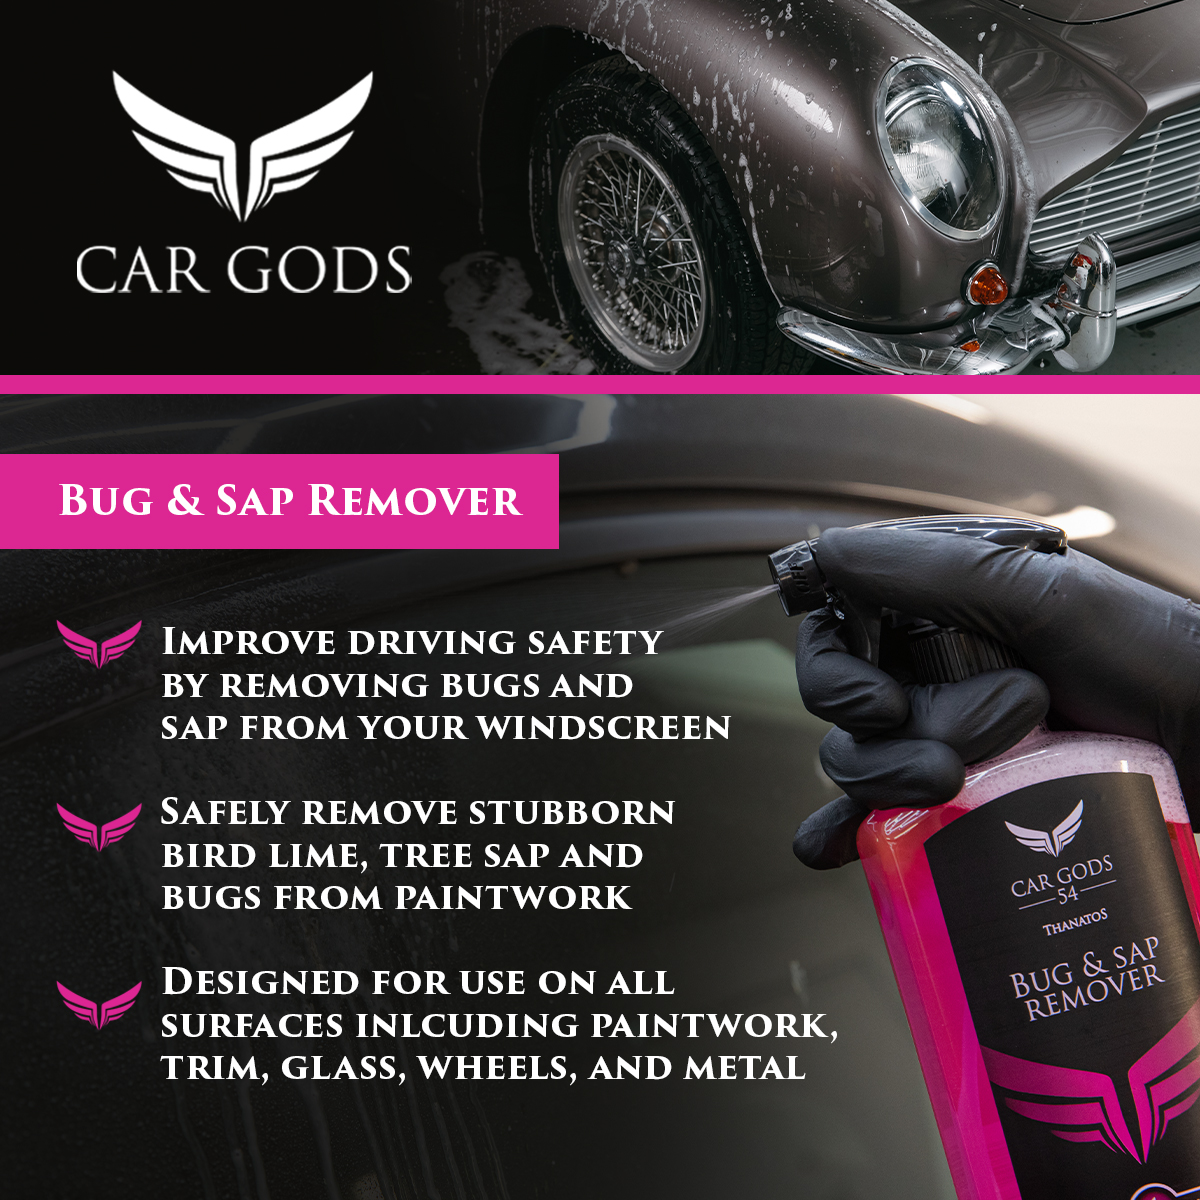 Car Gods Bug & Sap Remover. Improve driving safety by removing bugs, tree sap and bird lime from your windscreen. Remove stubborn deposits from all exterior surfaces including paintwork, trim, plastic, glass, and metal.